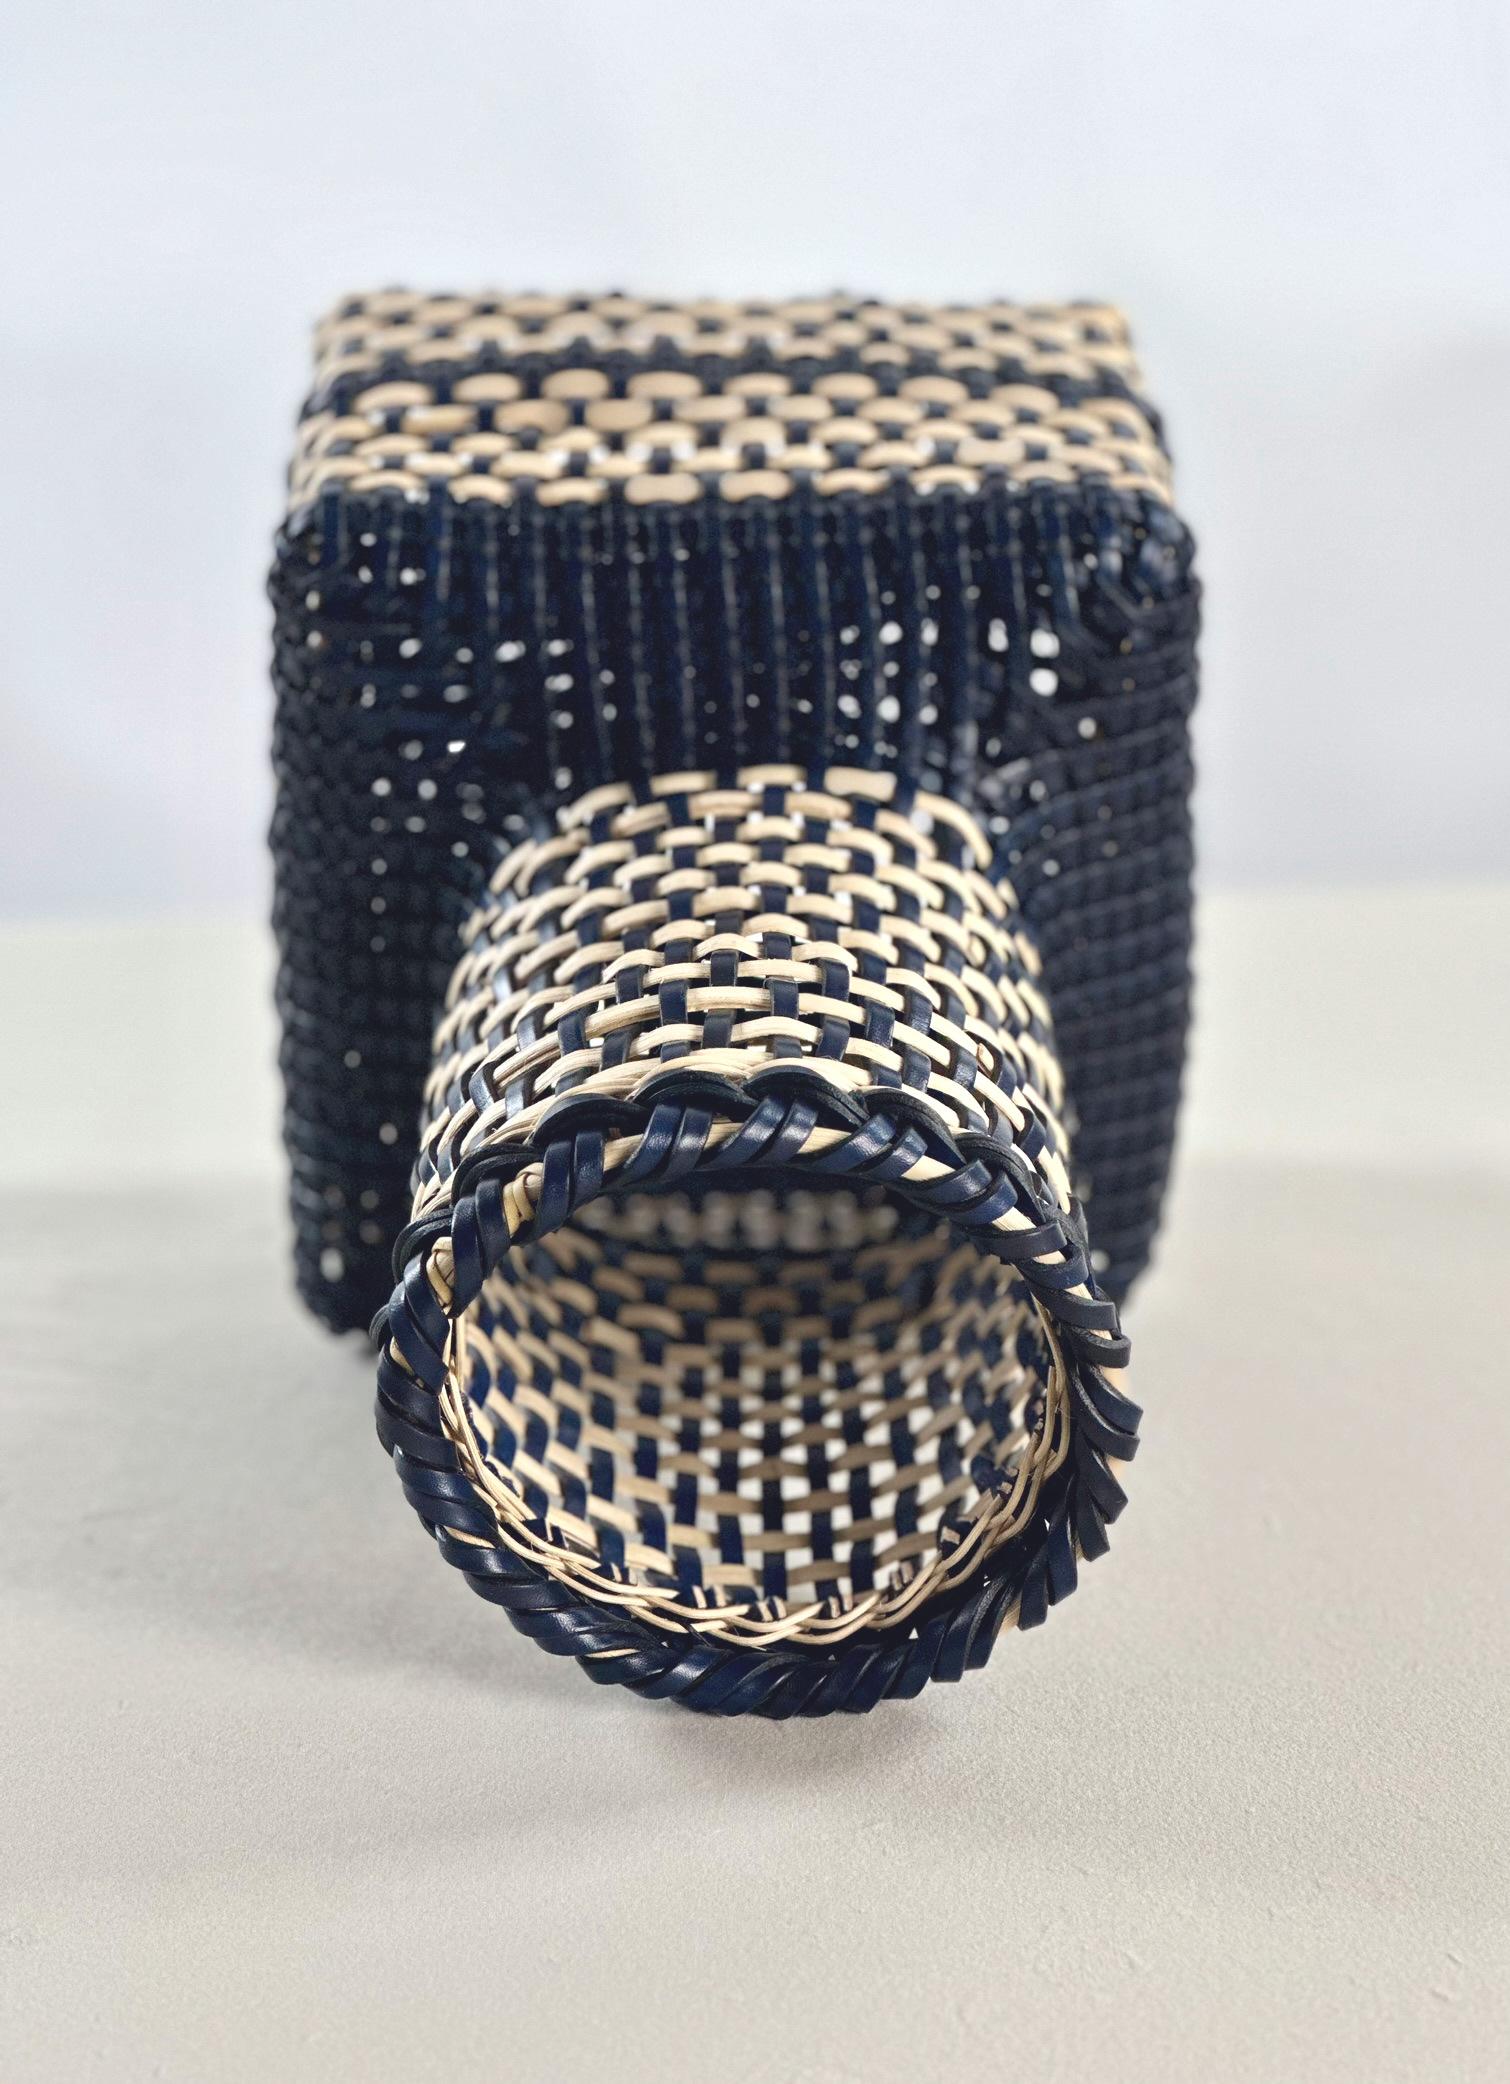 Hand-Woven Japanese Ikebana Inspired Leather & Cane Handmade Basket Navy & Off White Color For Sale